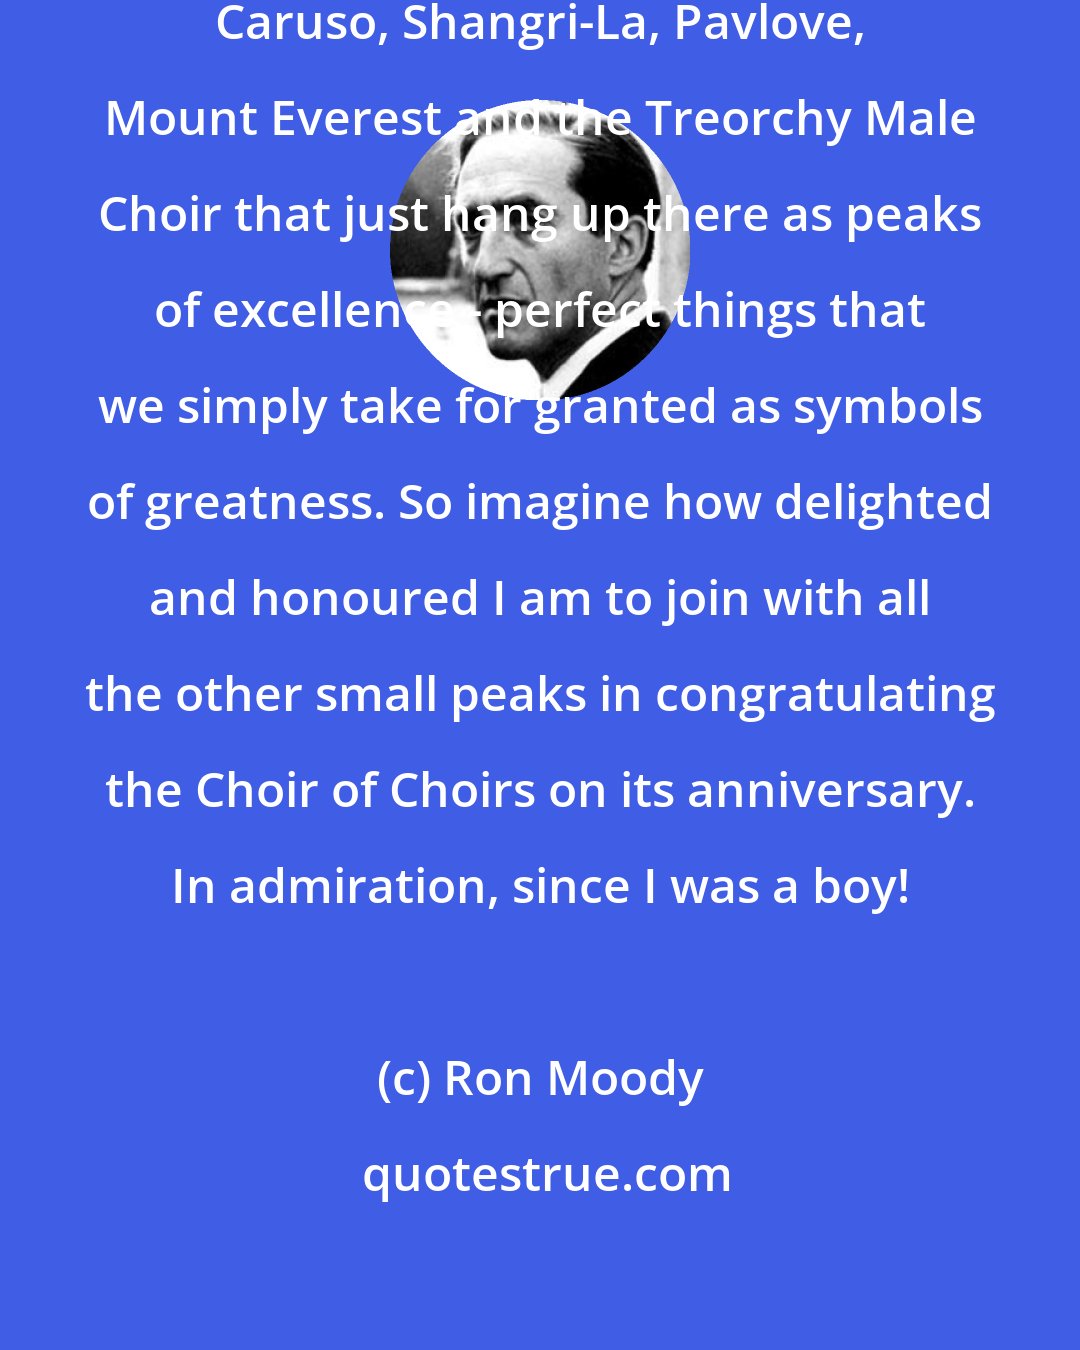 Ron Moody: There are names like Savoy Hotel, Caruso, Shangri-La, Pavlove, Mount Everest and the Treorchy Male Choir that just hang up there as peaks of excellence - perfect things that we simply take for granted as symbols of greatness. So imagine how delighted and honoured I am to join with all the other small peaks in congratulating the Choir of Choirs on its anniversary. In admiration, since I was a boy!